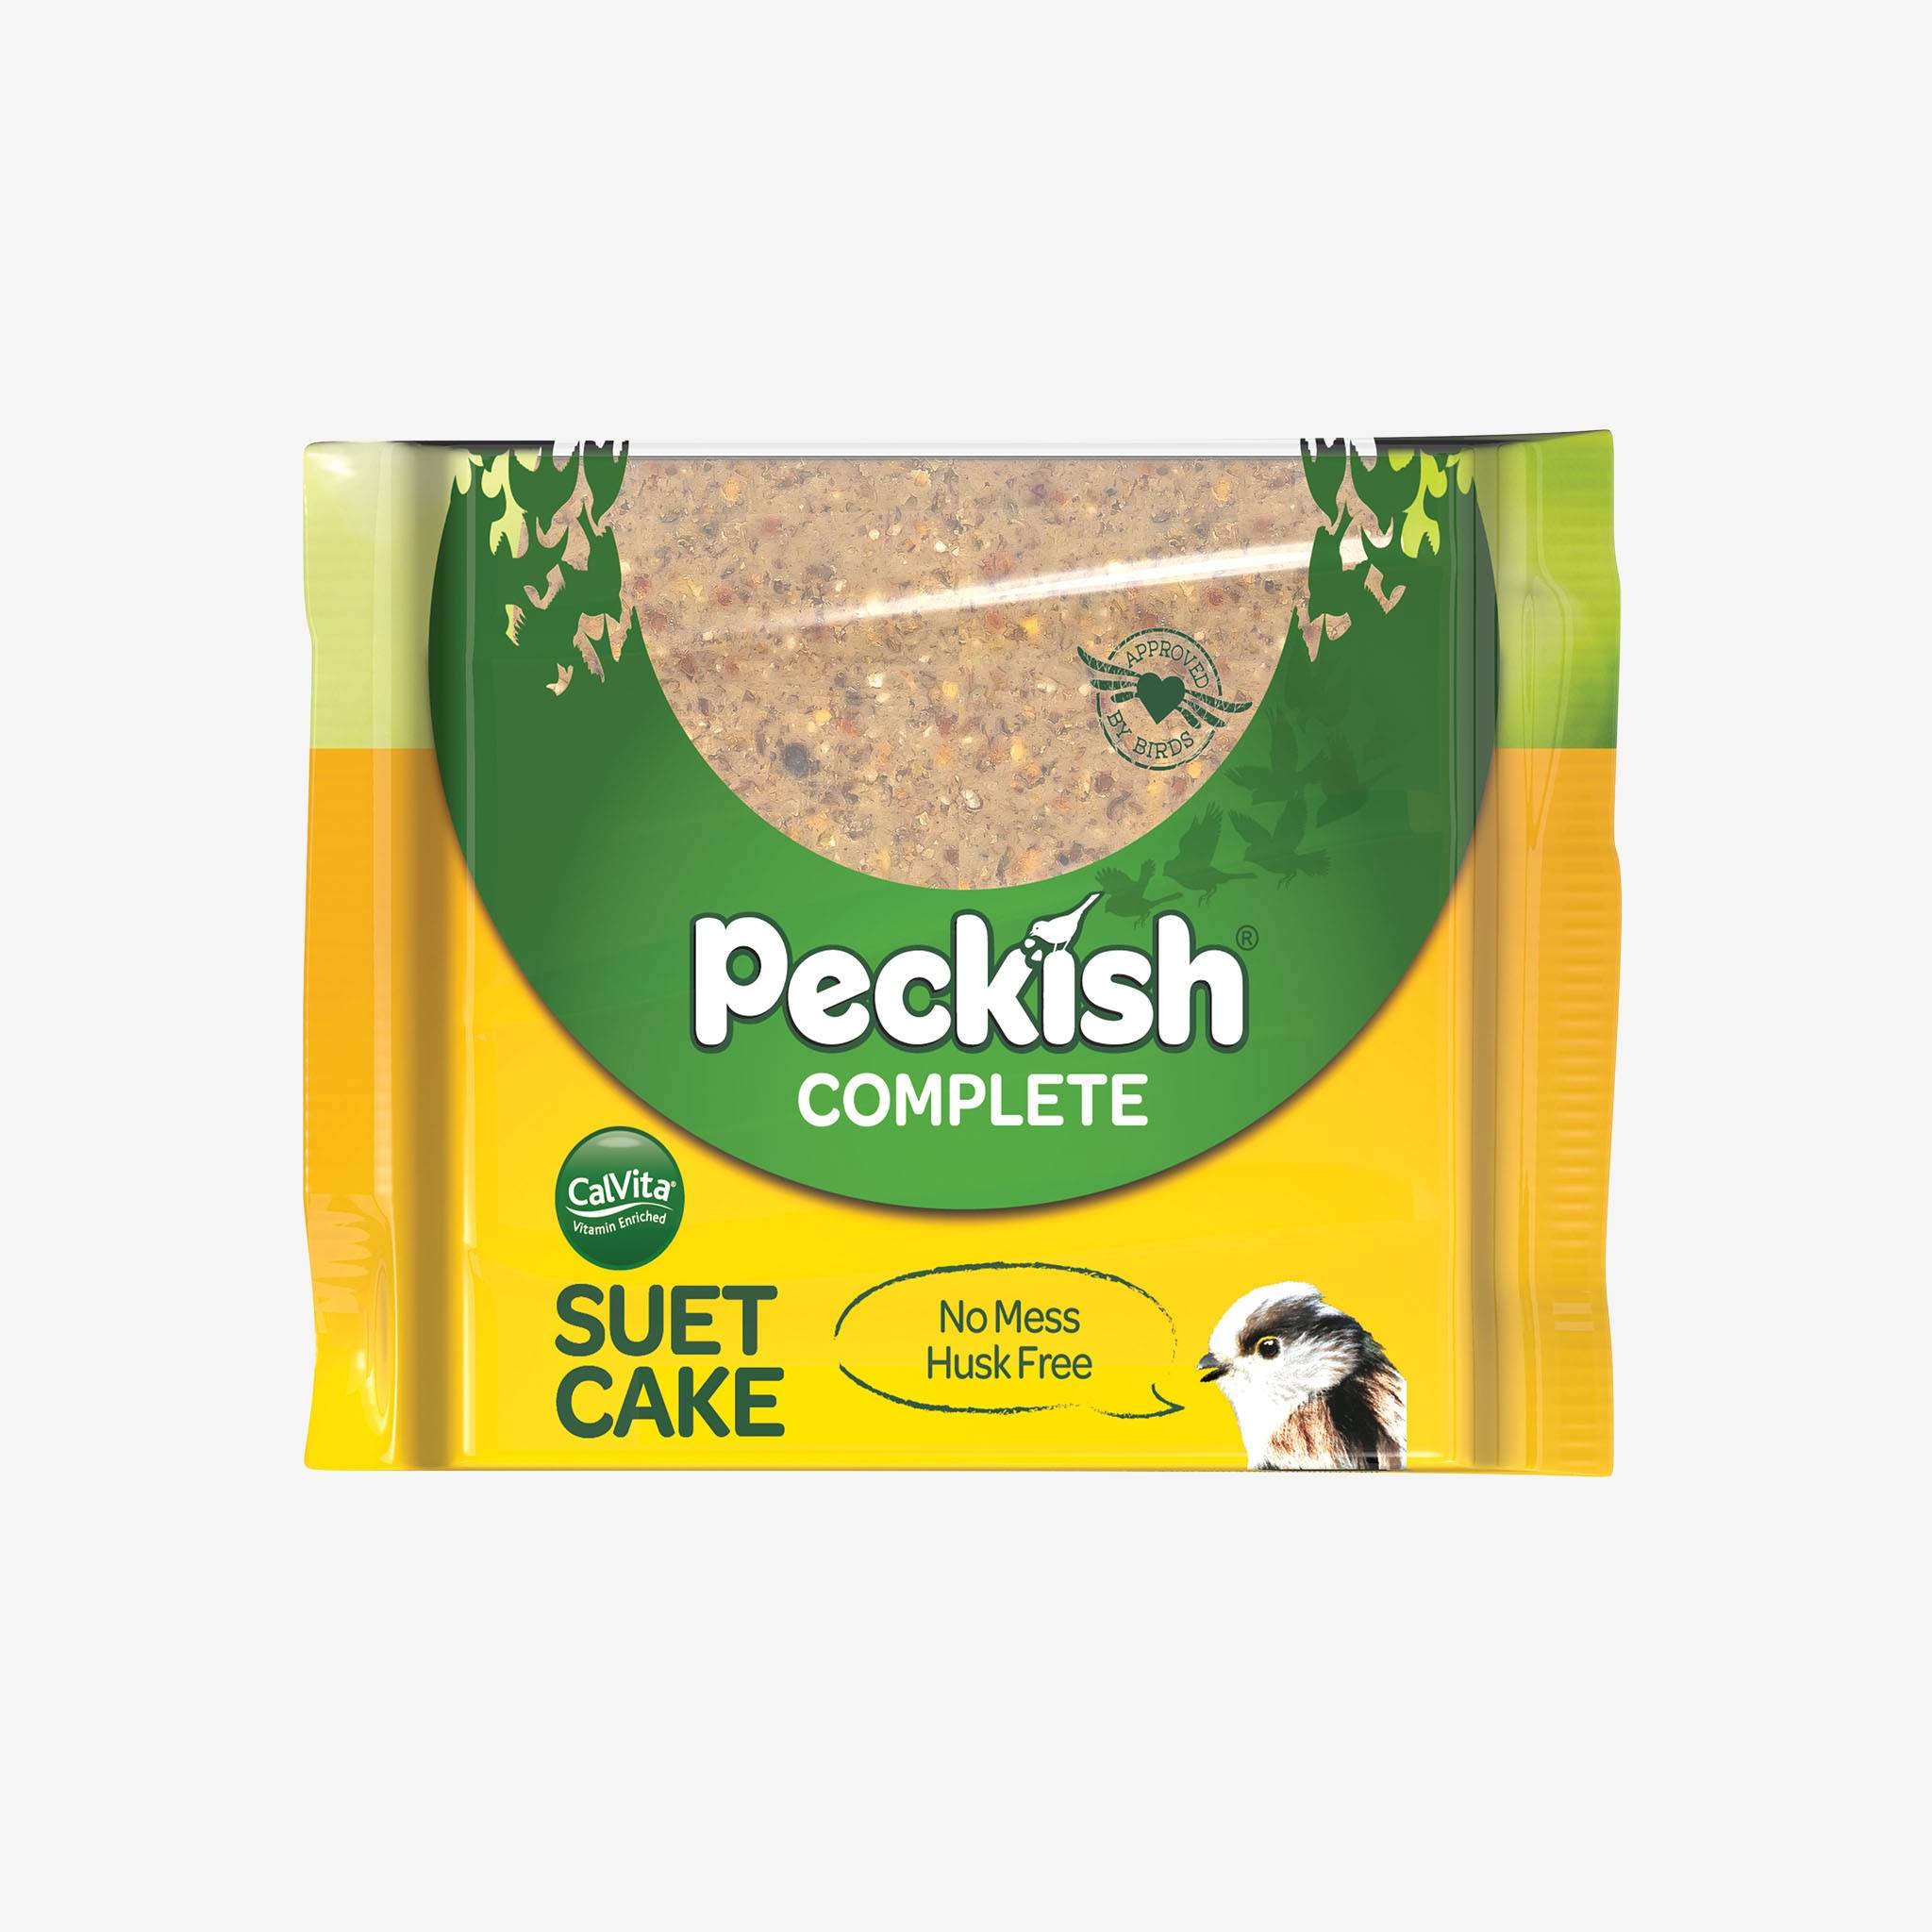 Peckish Complete Suet Cake in packaging